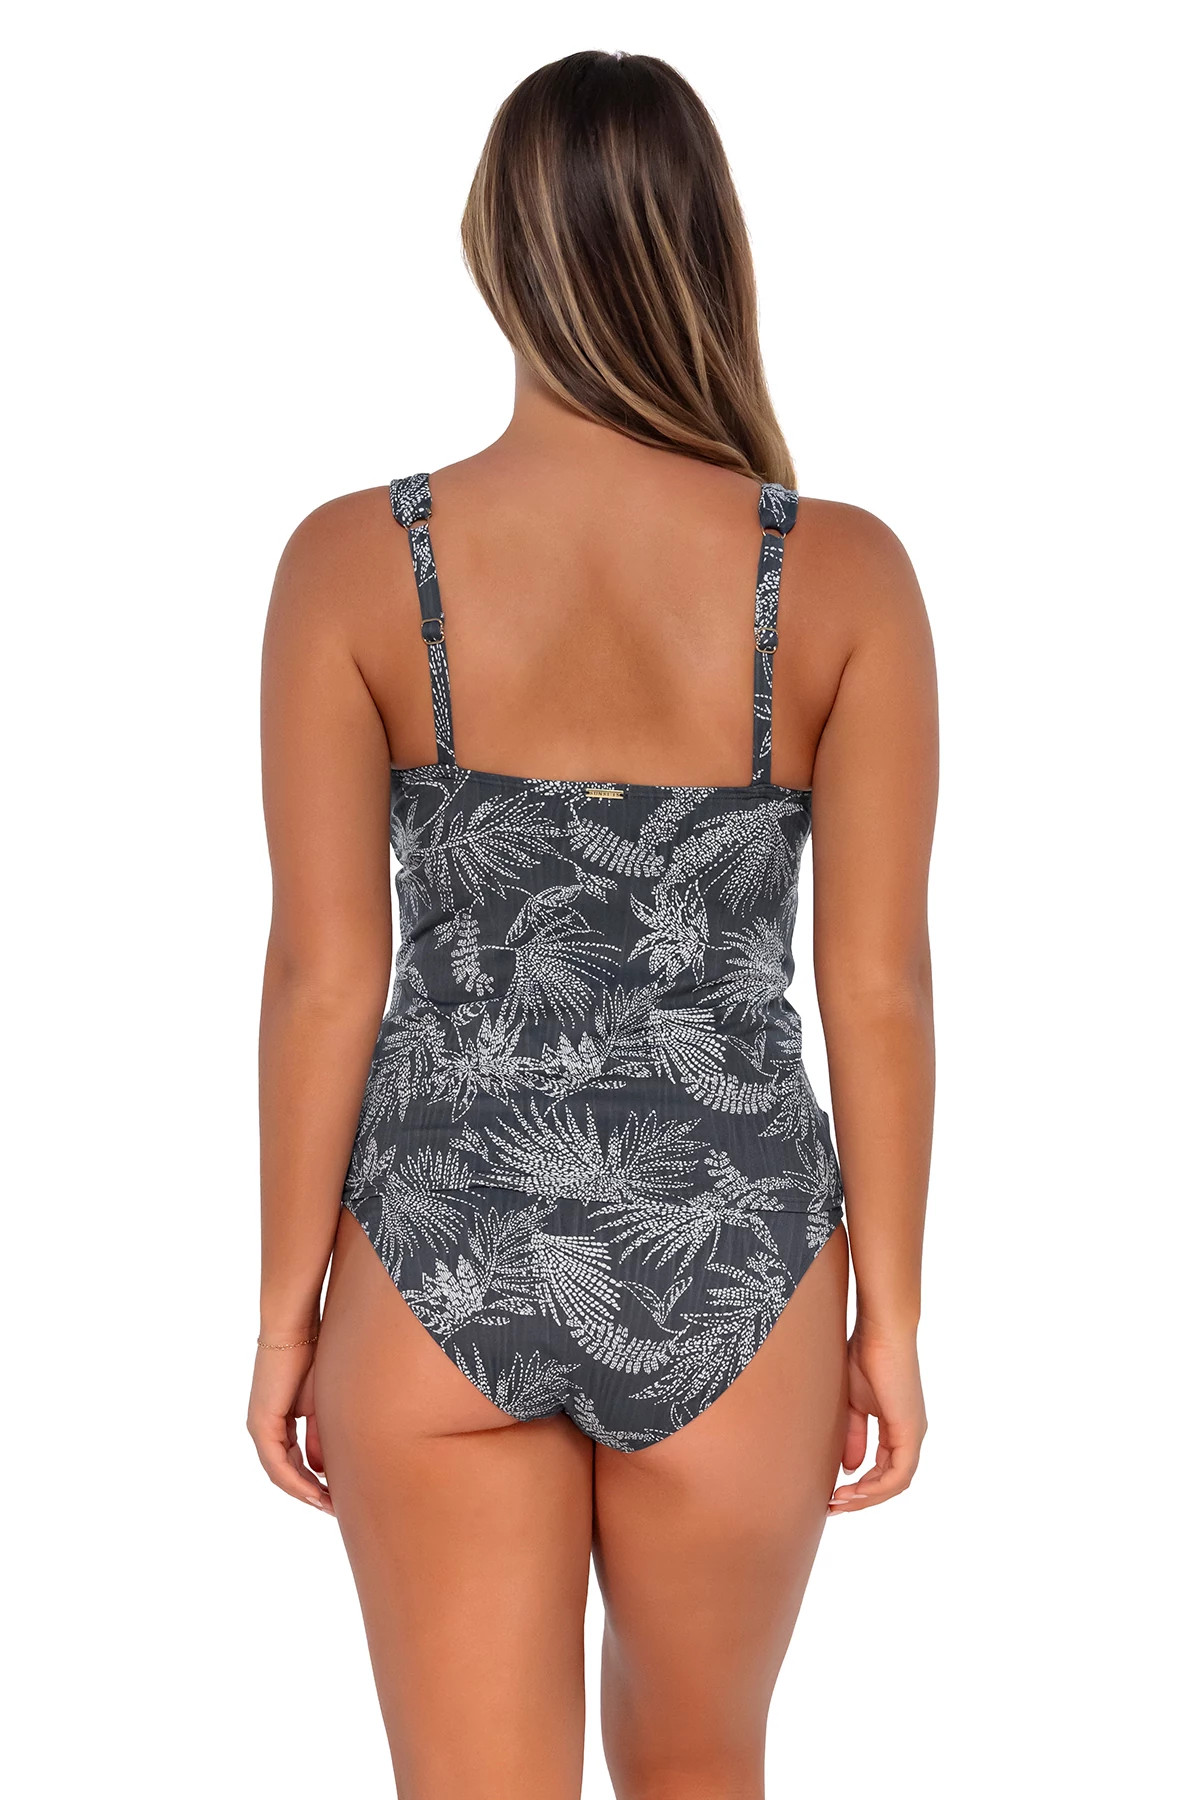 FANFARE SEAGRASS TEXTURE Elsie Underwire Tankini Top (E-H Cup) image number 2